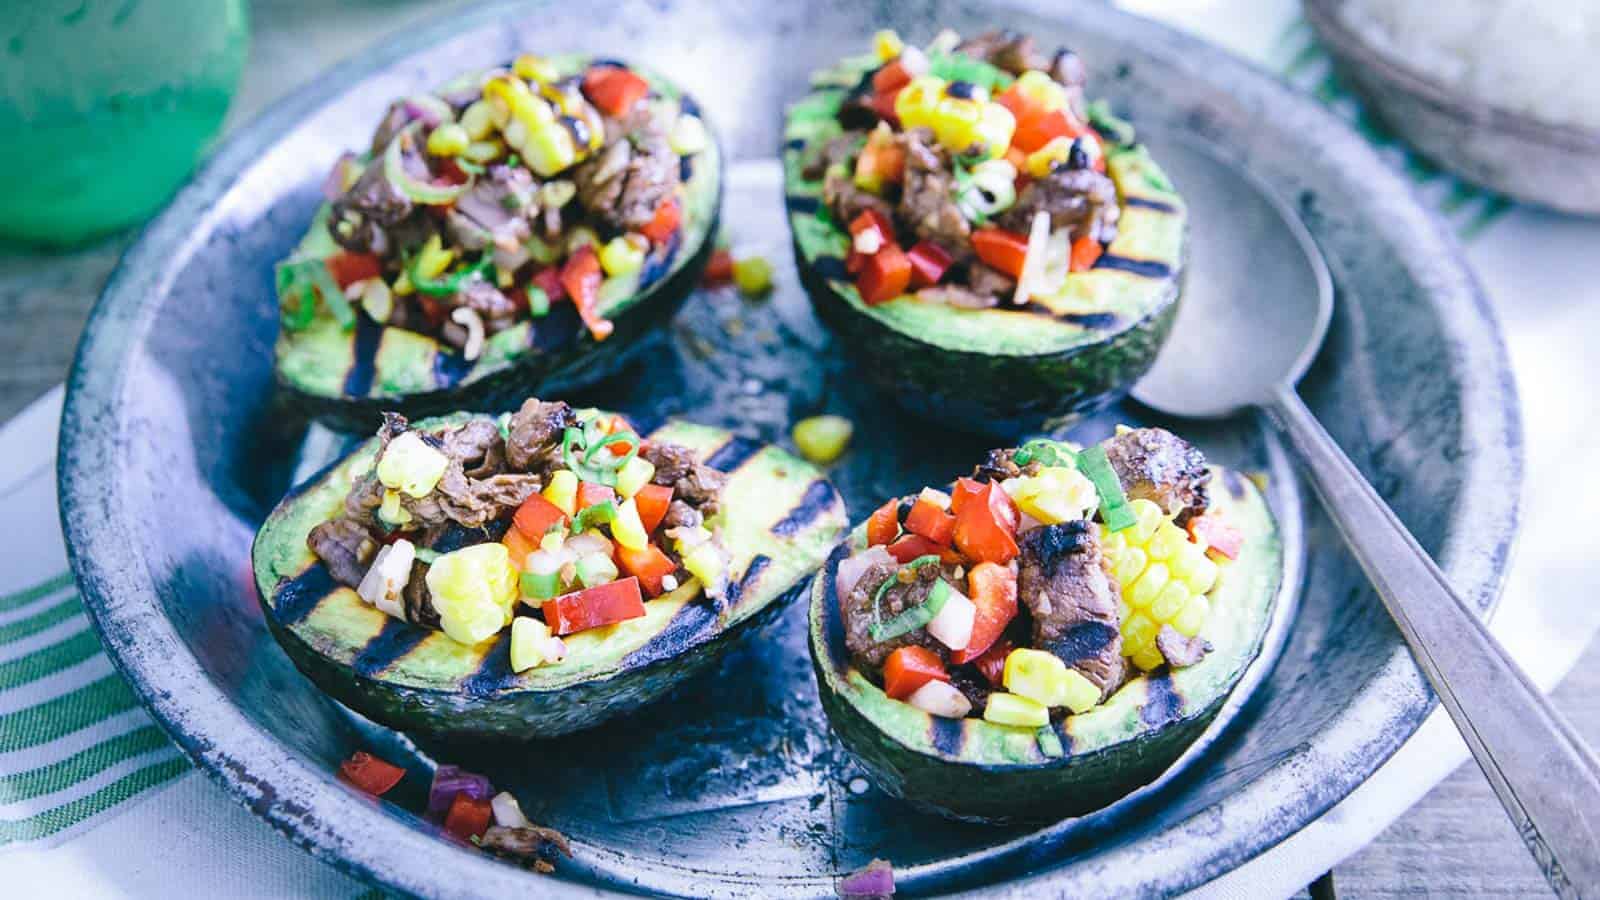 Steak stuffed grilled avocados on a metal plate.